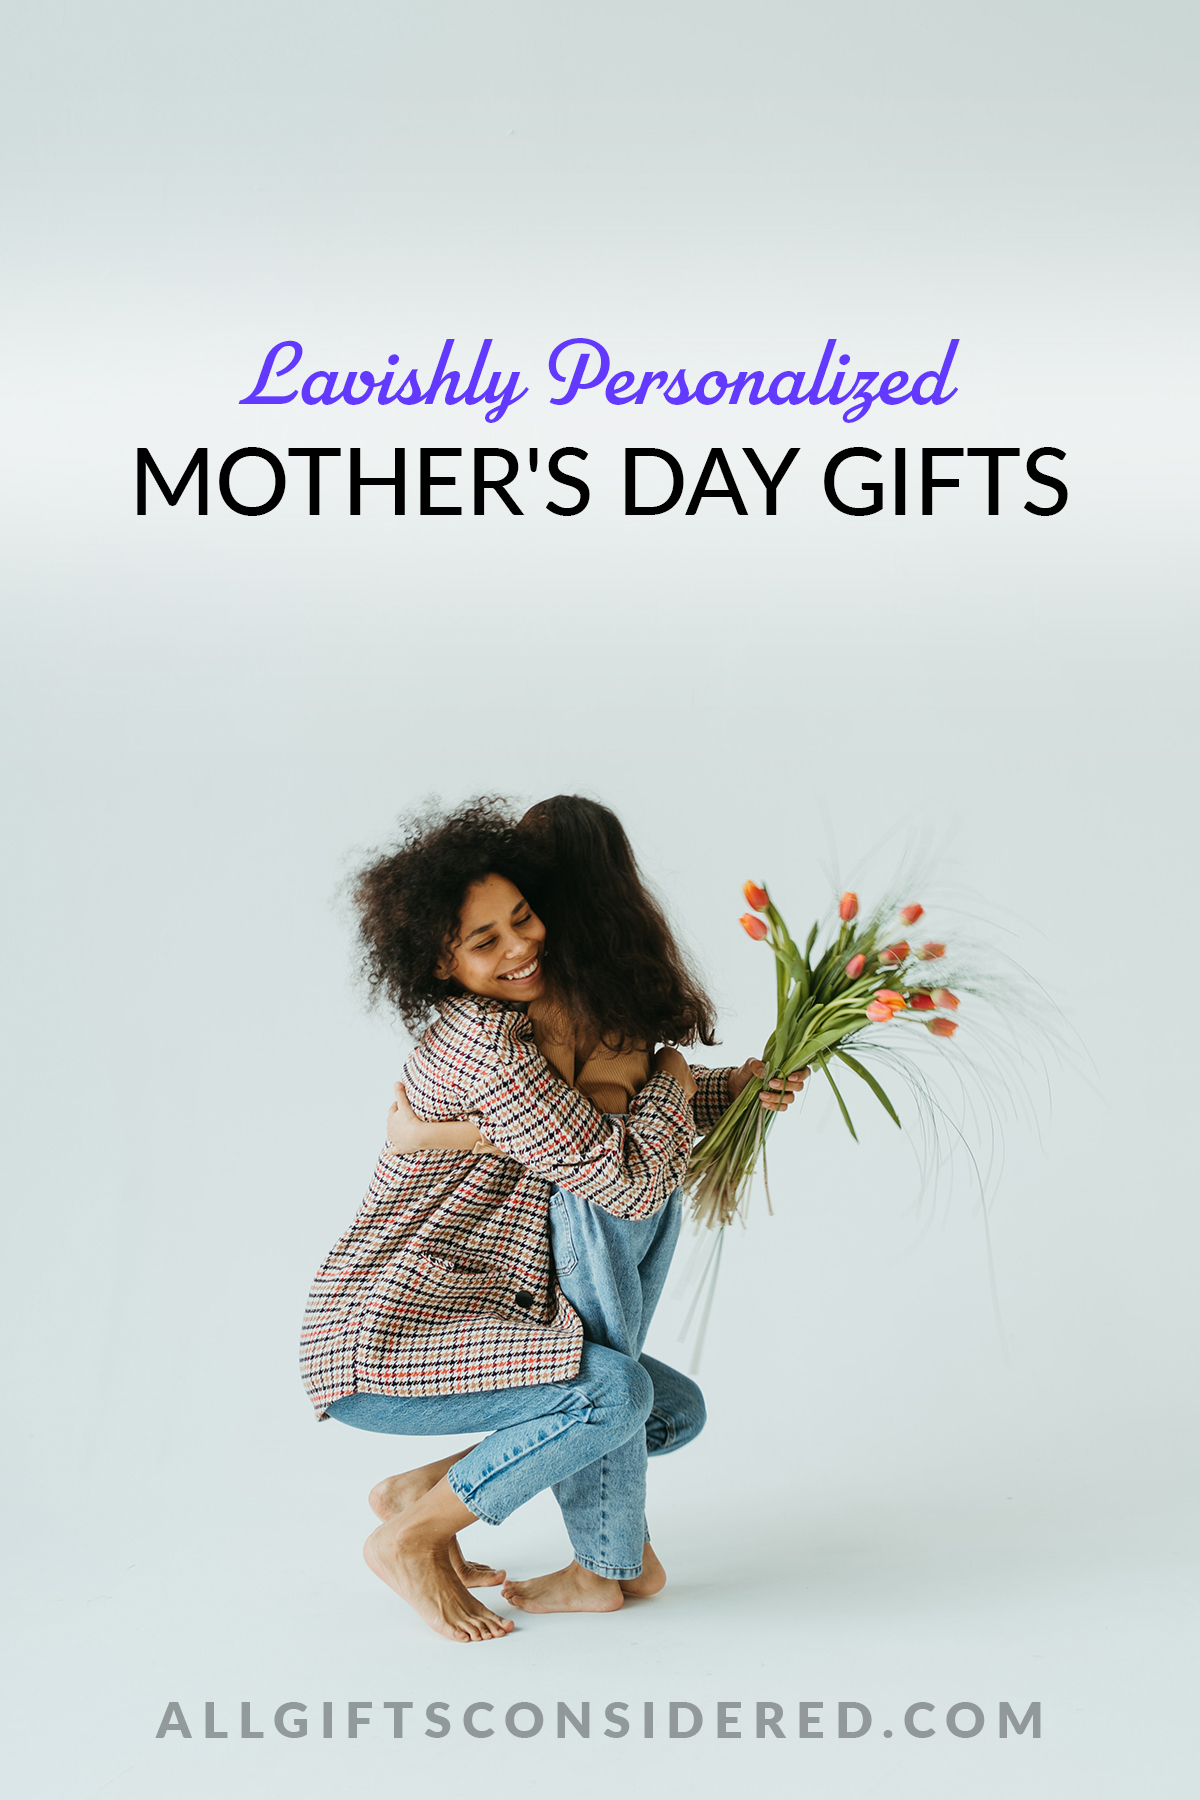 Personalized Mothers Day Gifts Ideas for Your Mother  CakeFlowersGiftcom  Blog